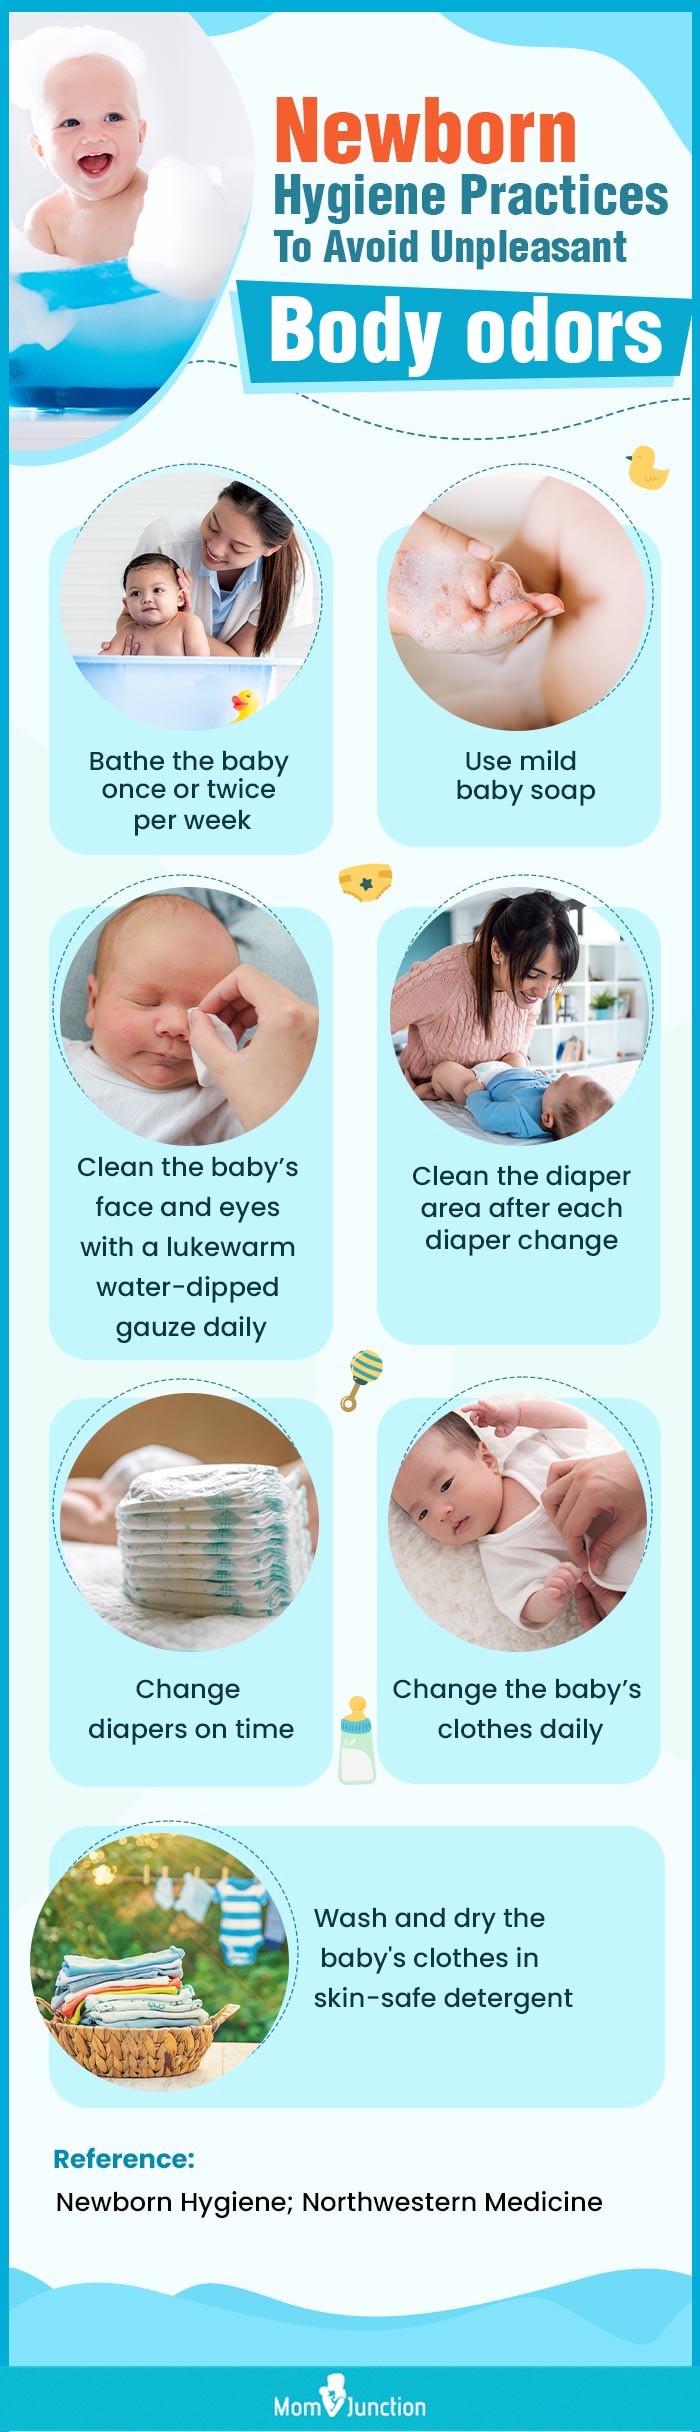 How To Deal With Body Odor In Babies?